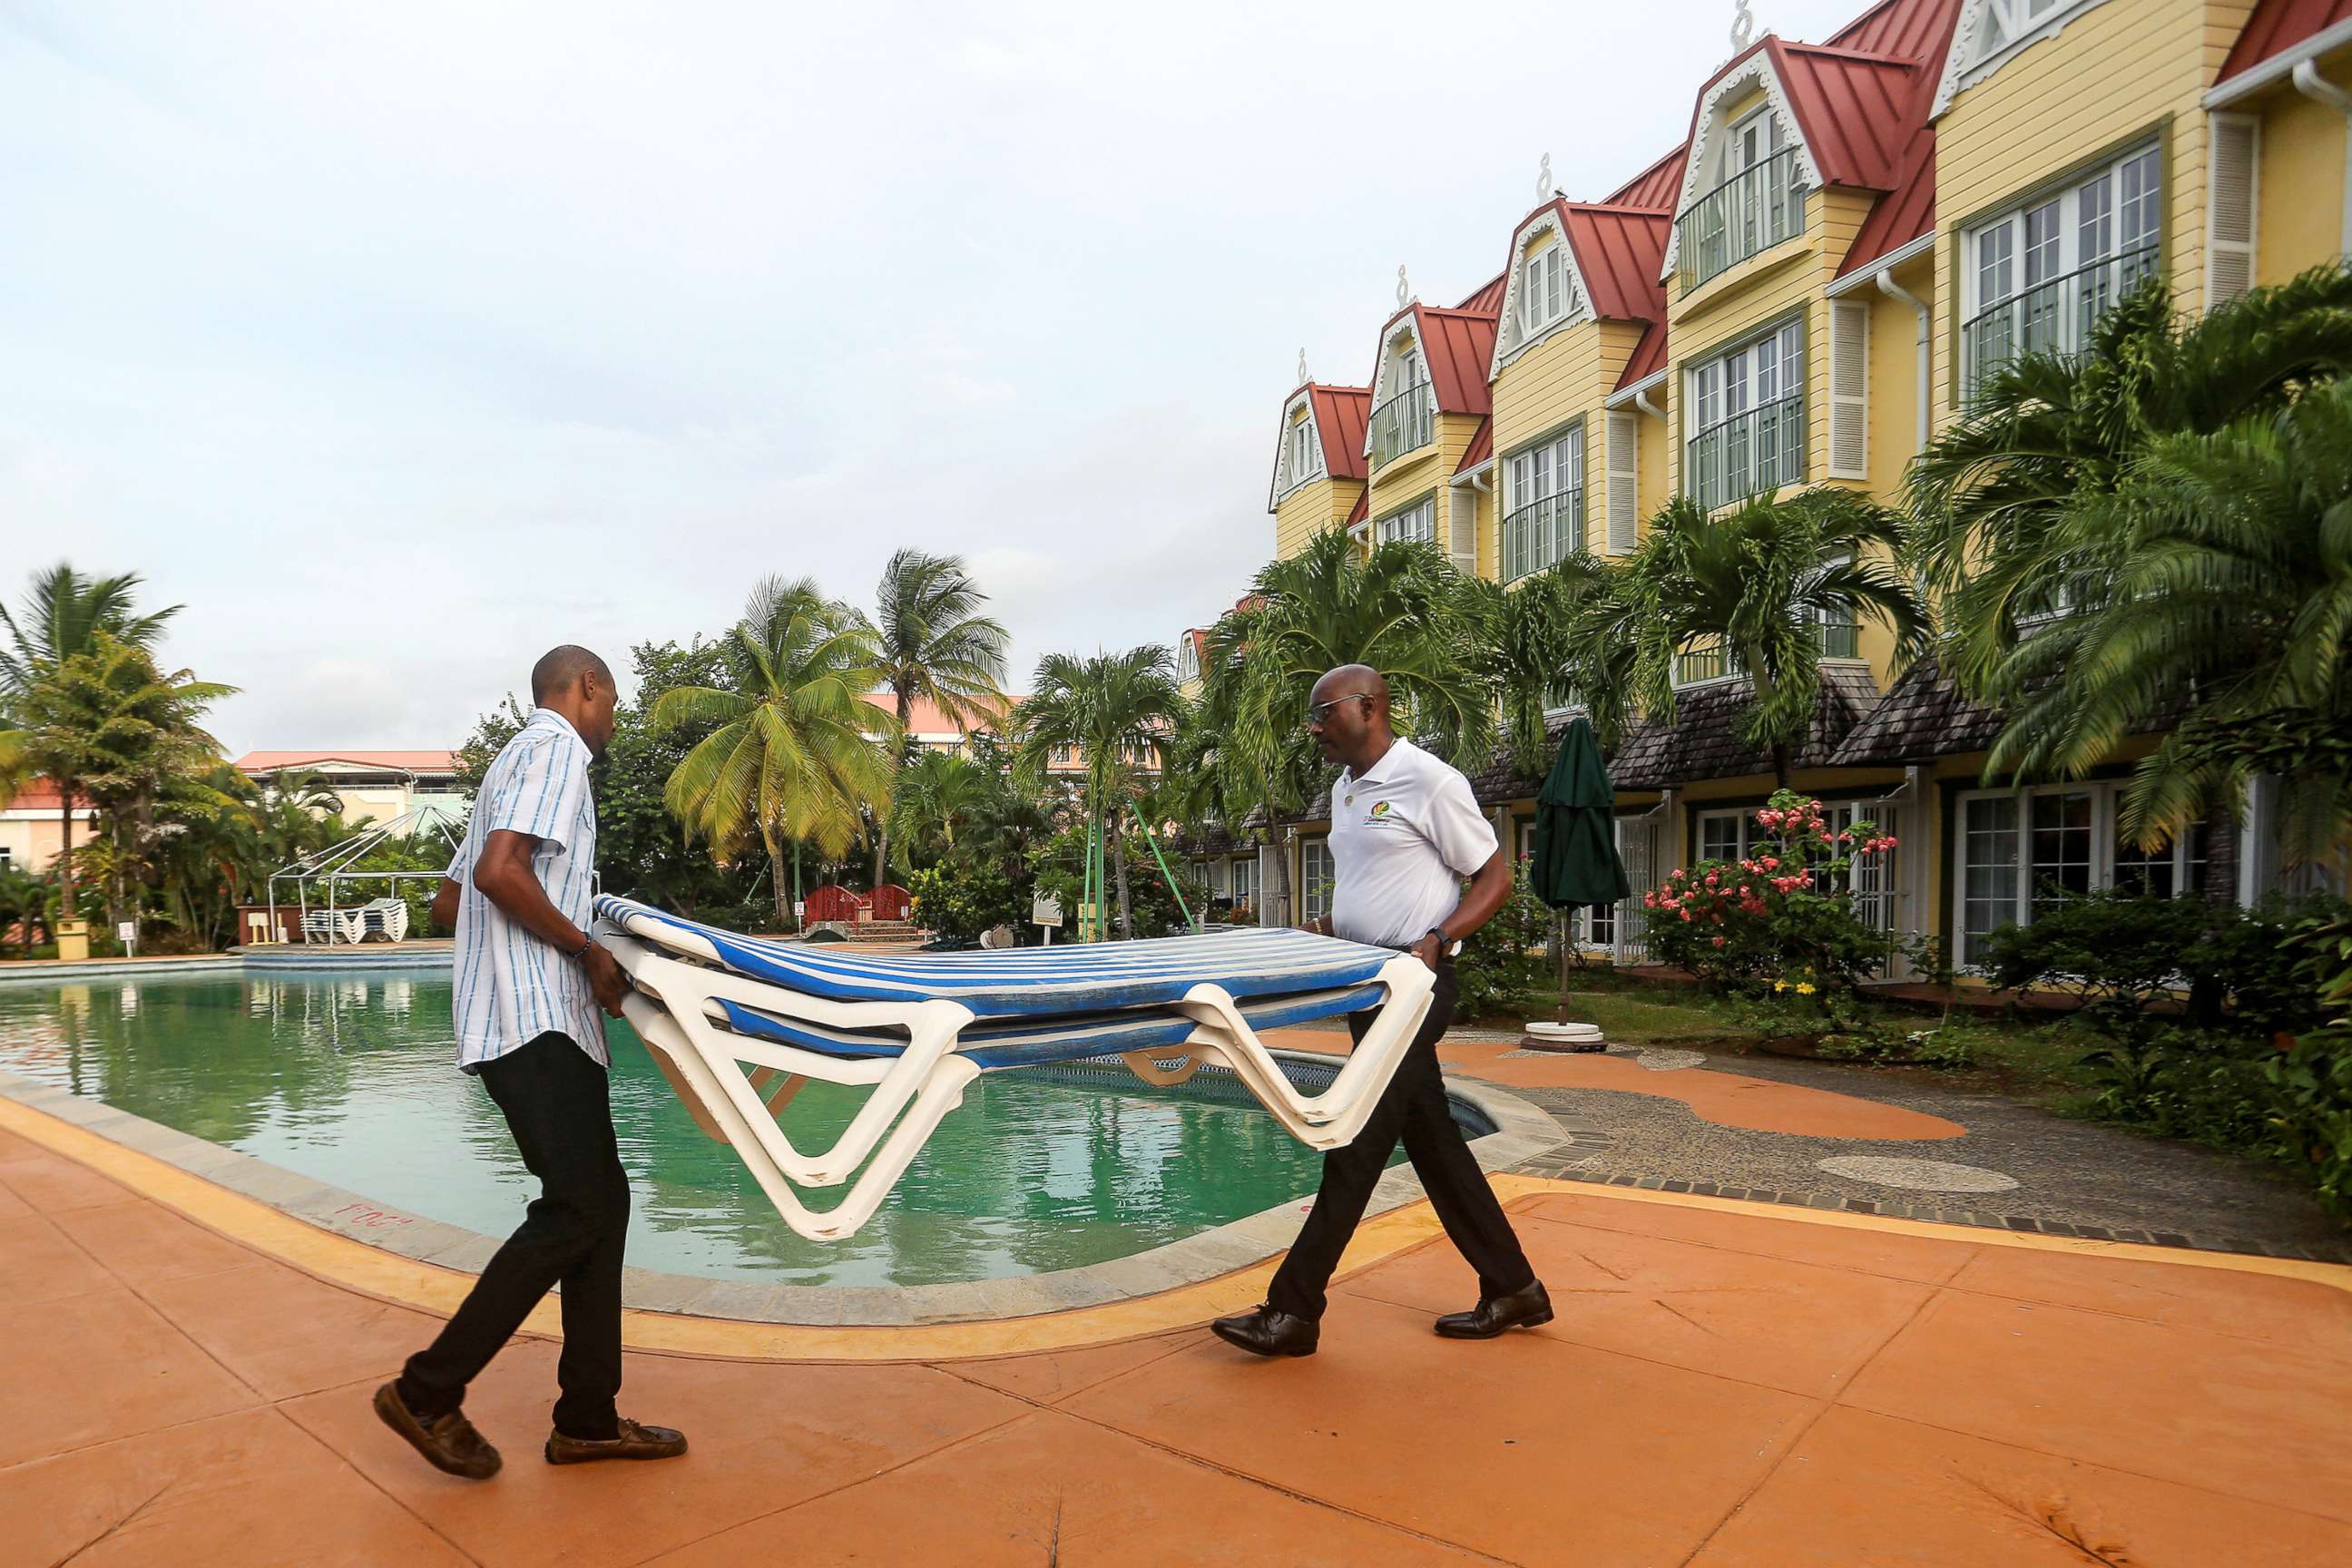 PHOTO: Hotel employees remove beach cots from the pool area in preparation for the arrival of Tropical Storm Dorian in Gros Islet, St. Lucia, Aug. 26, 2019.